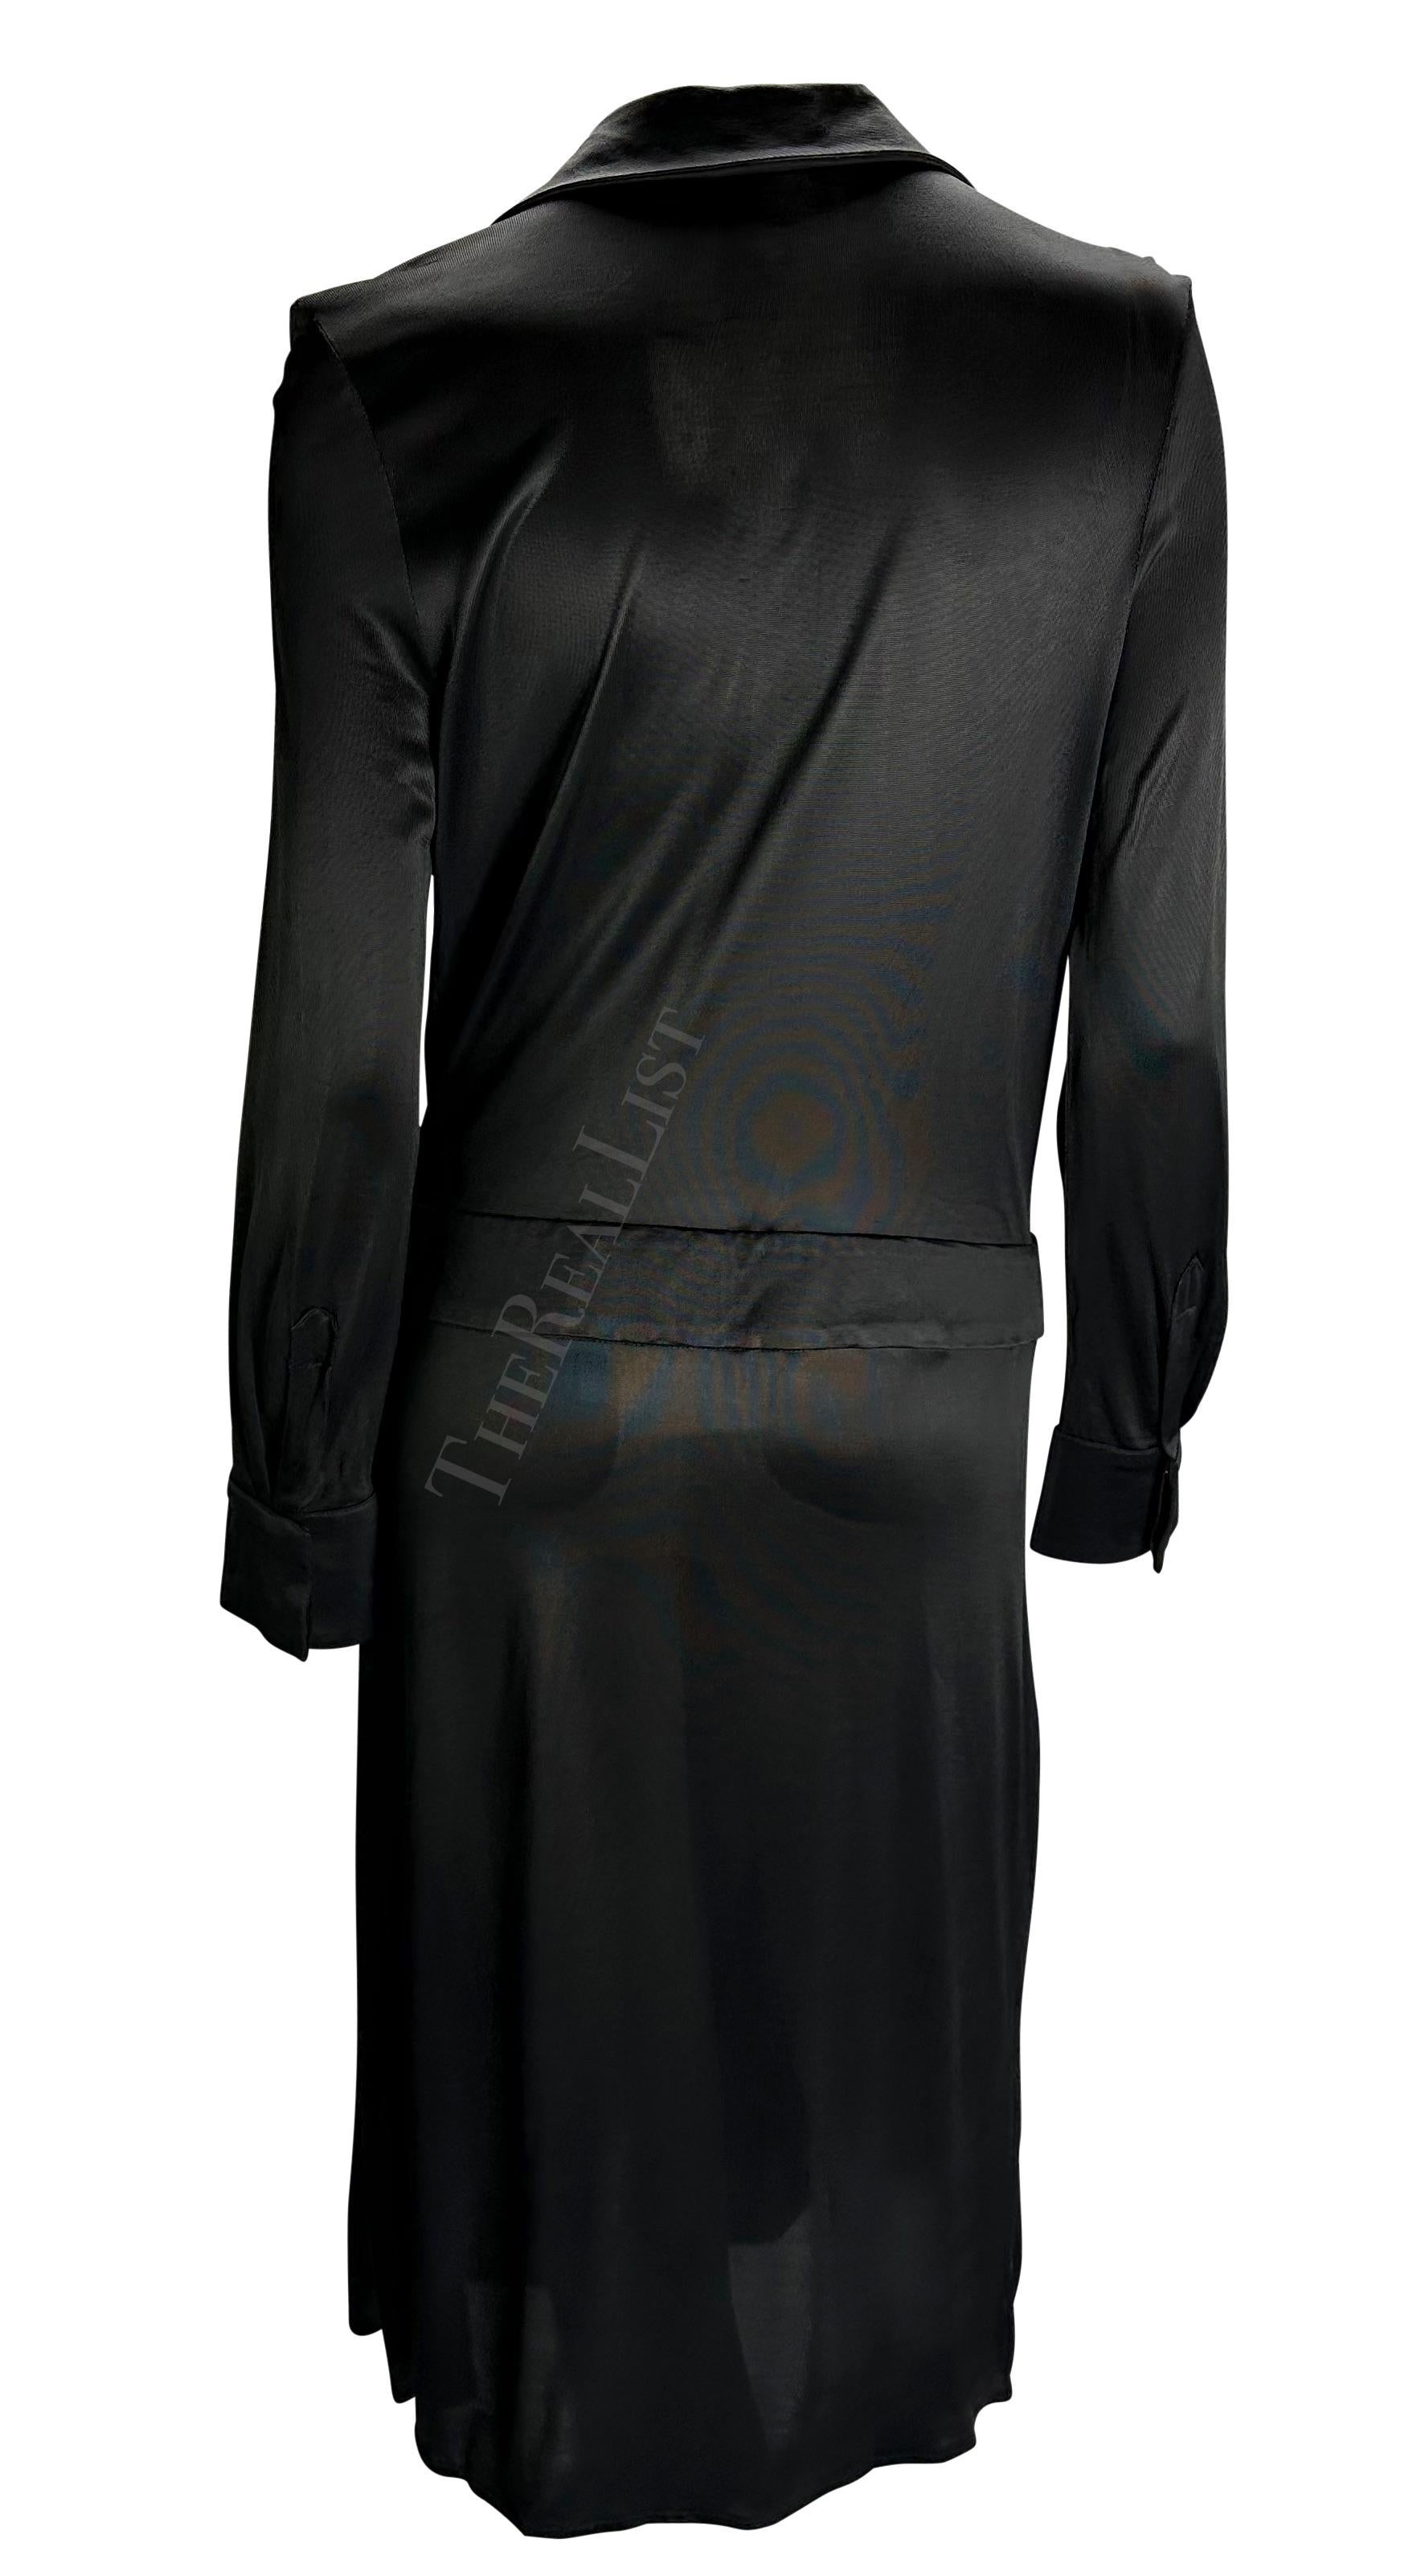 S/S 2000 Gucci by Tom Ford Runway Plunging Neckline Black Viscose Runway Dress For Sale 4